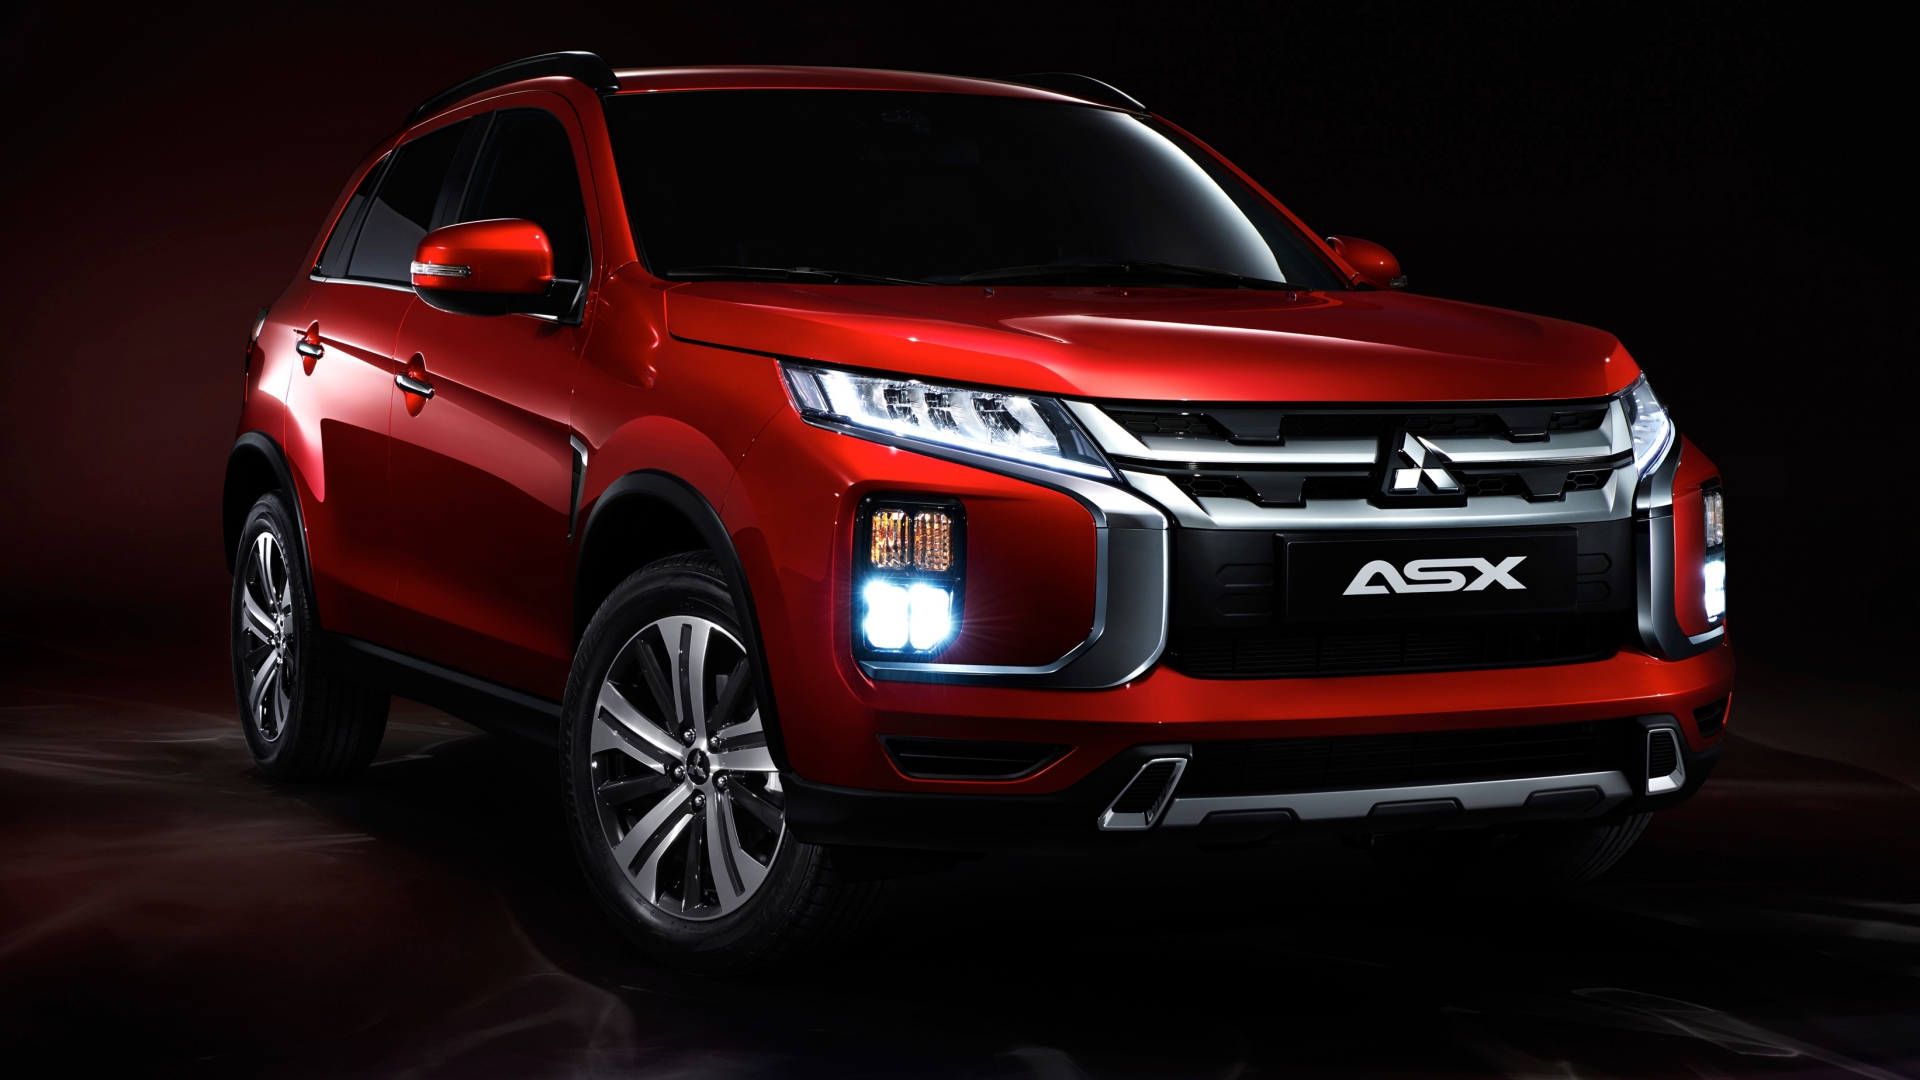 News - 2020 Mitsubishi ASX Is The Definition Of ‘Facelift’